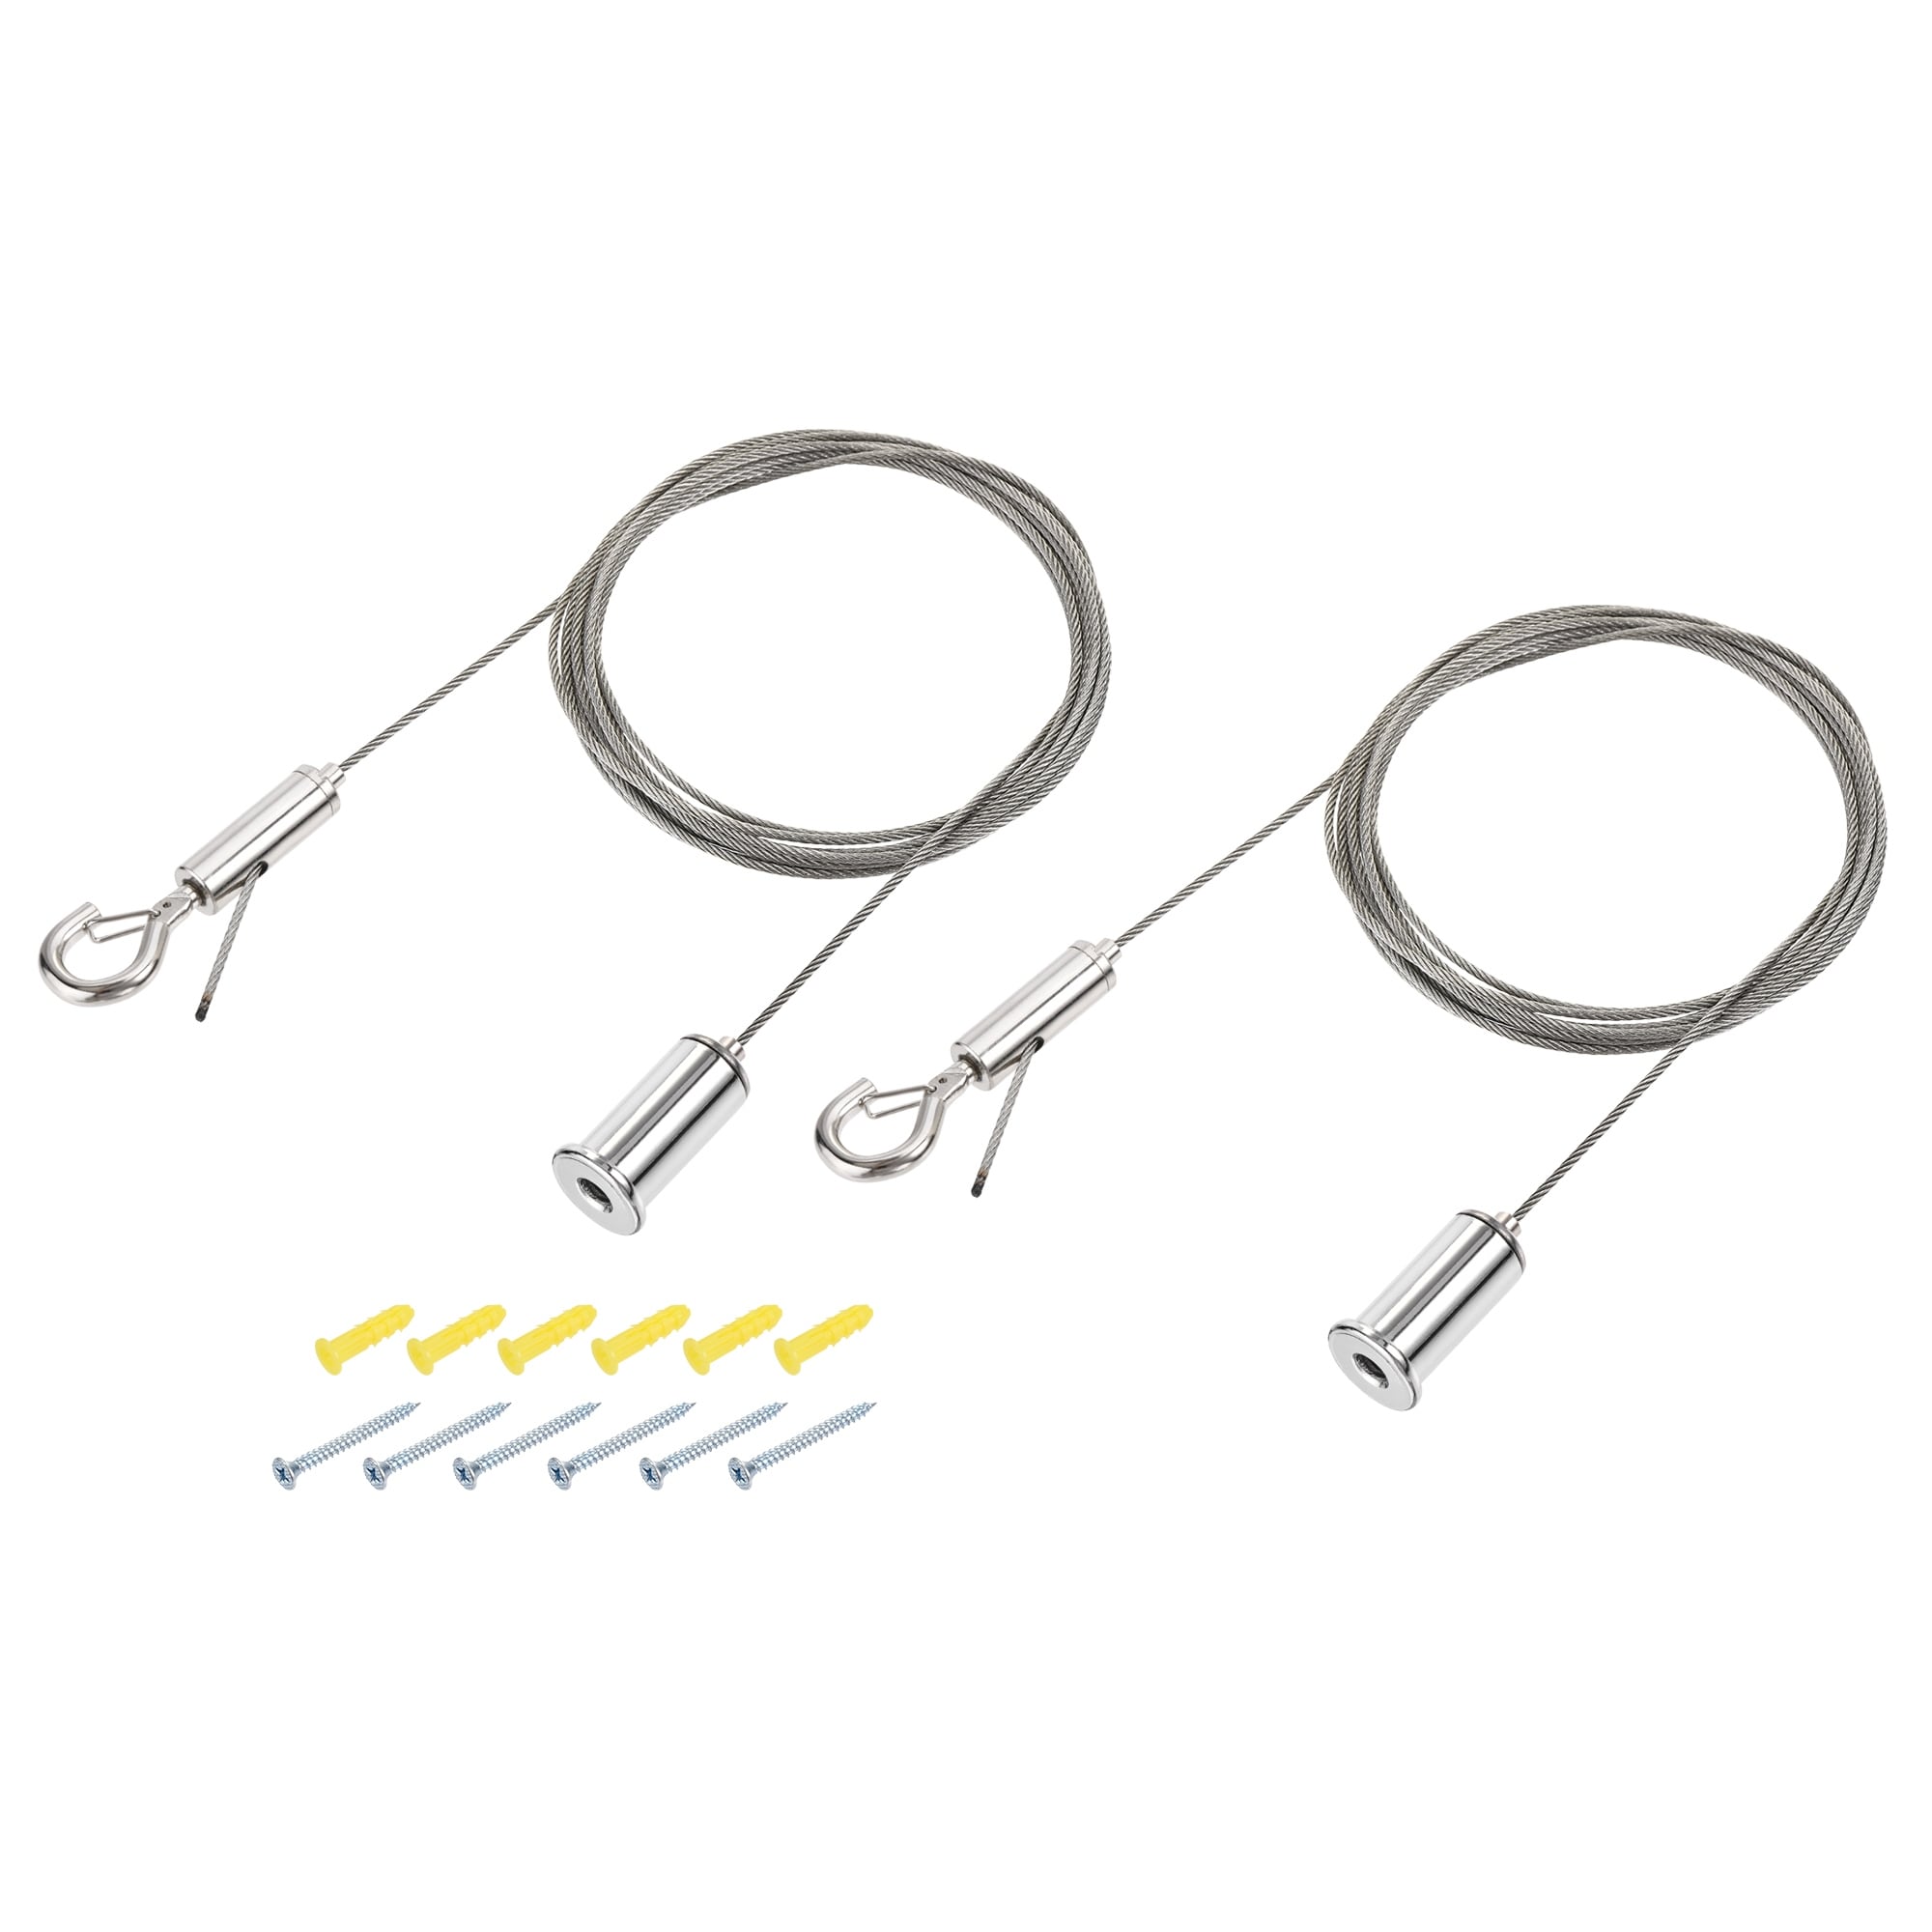 Picture Hanging Wire Hooks Kit, 2Set 2.5M Hanger Wire, Load 33 lbs, 6Set  Screws - Silver